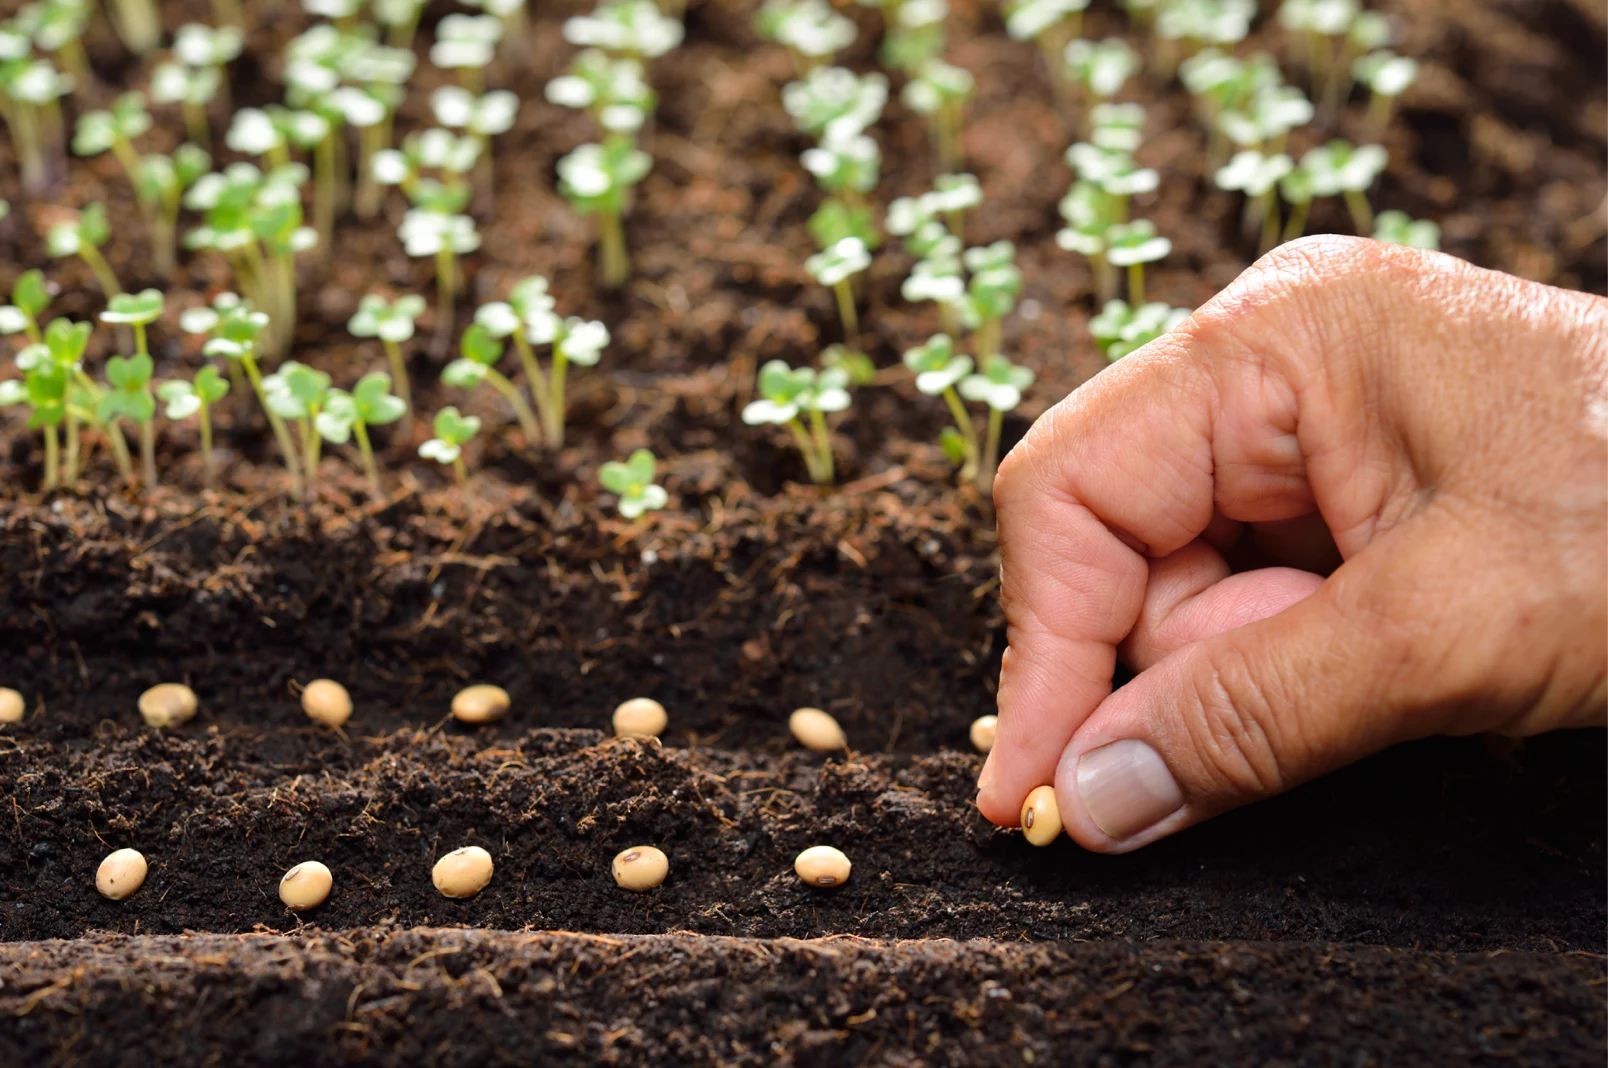 Hand sowing seeds on soil